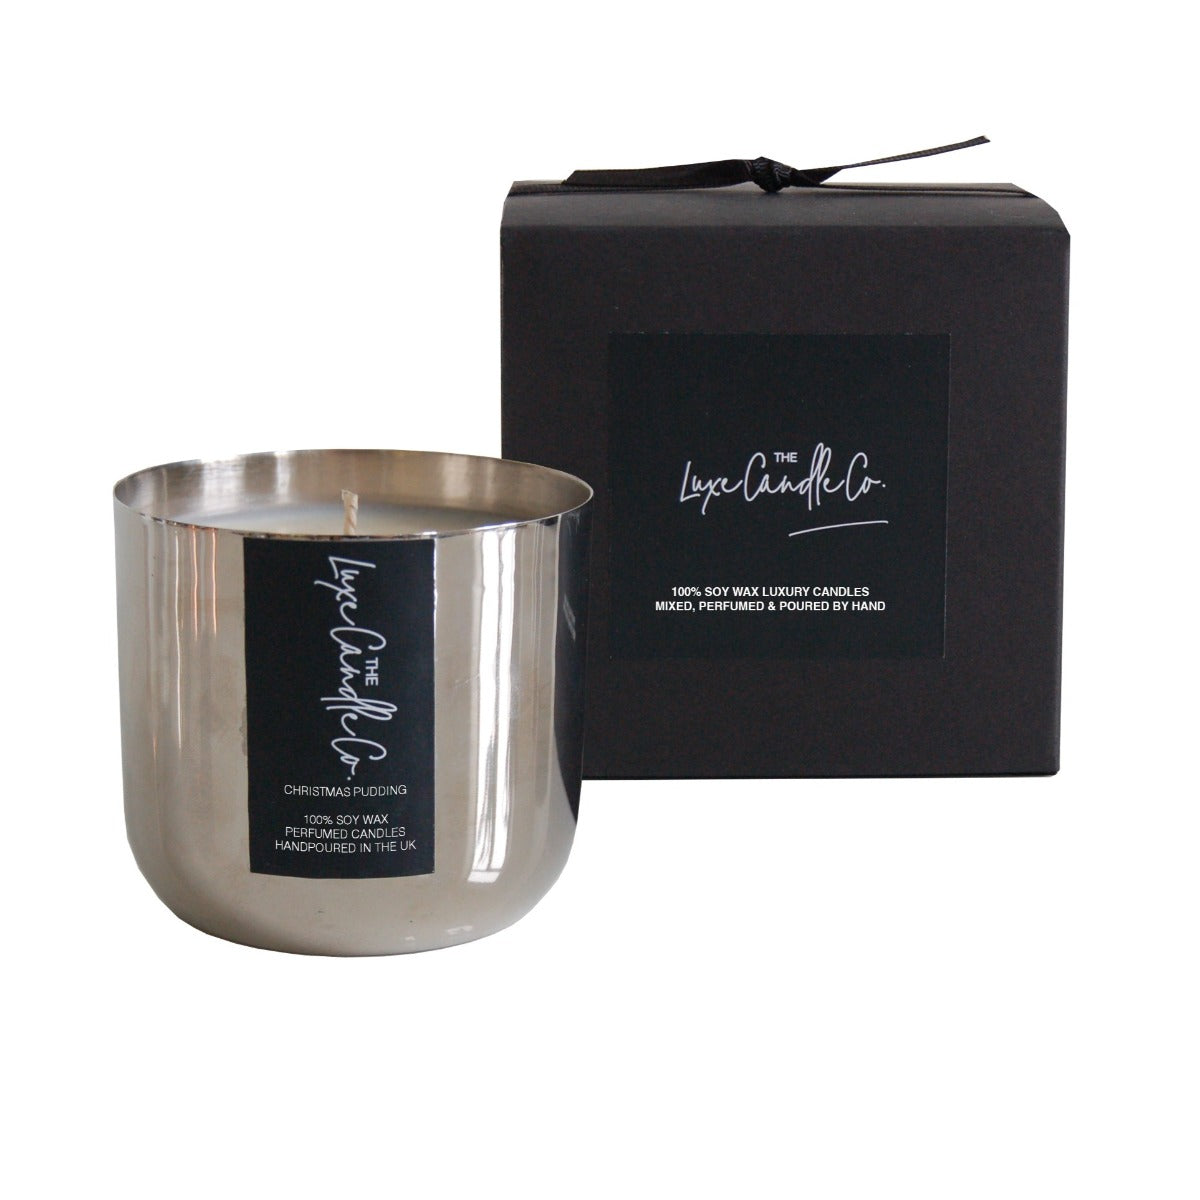 Silver Christmas Pudding scented soy wax candle | by The Luxe Candle Co